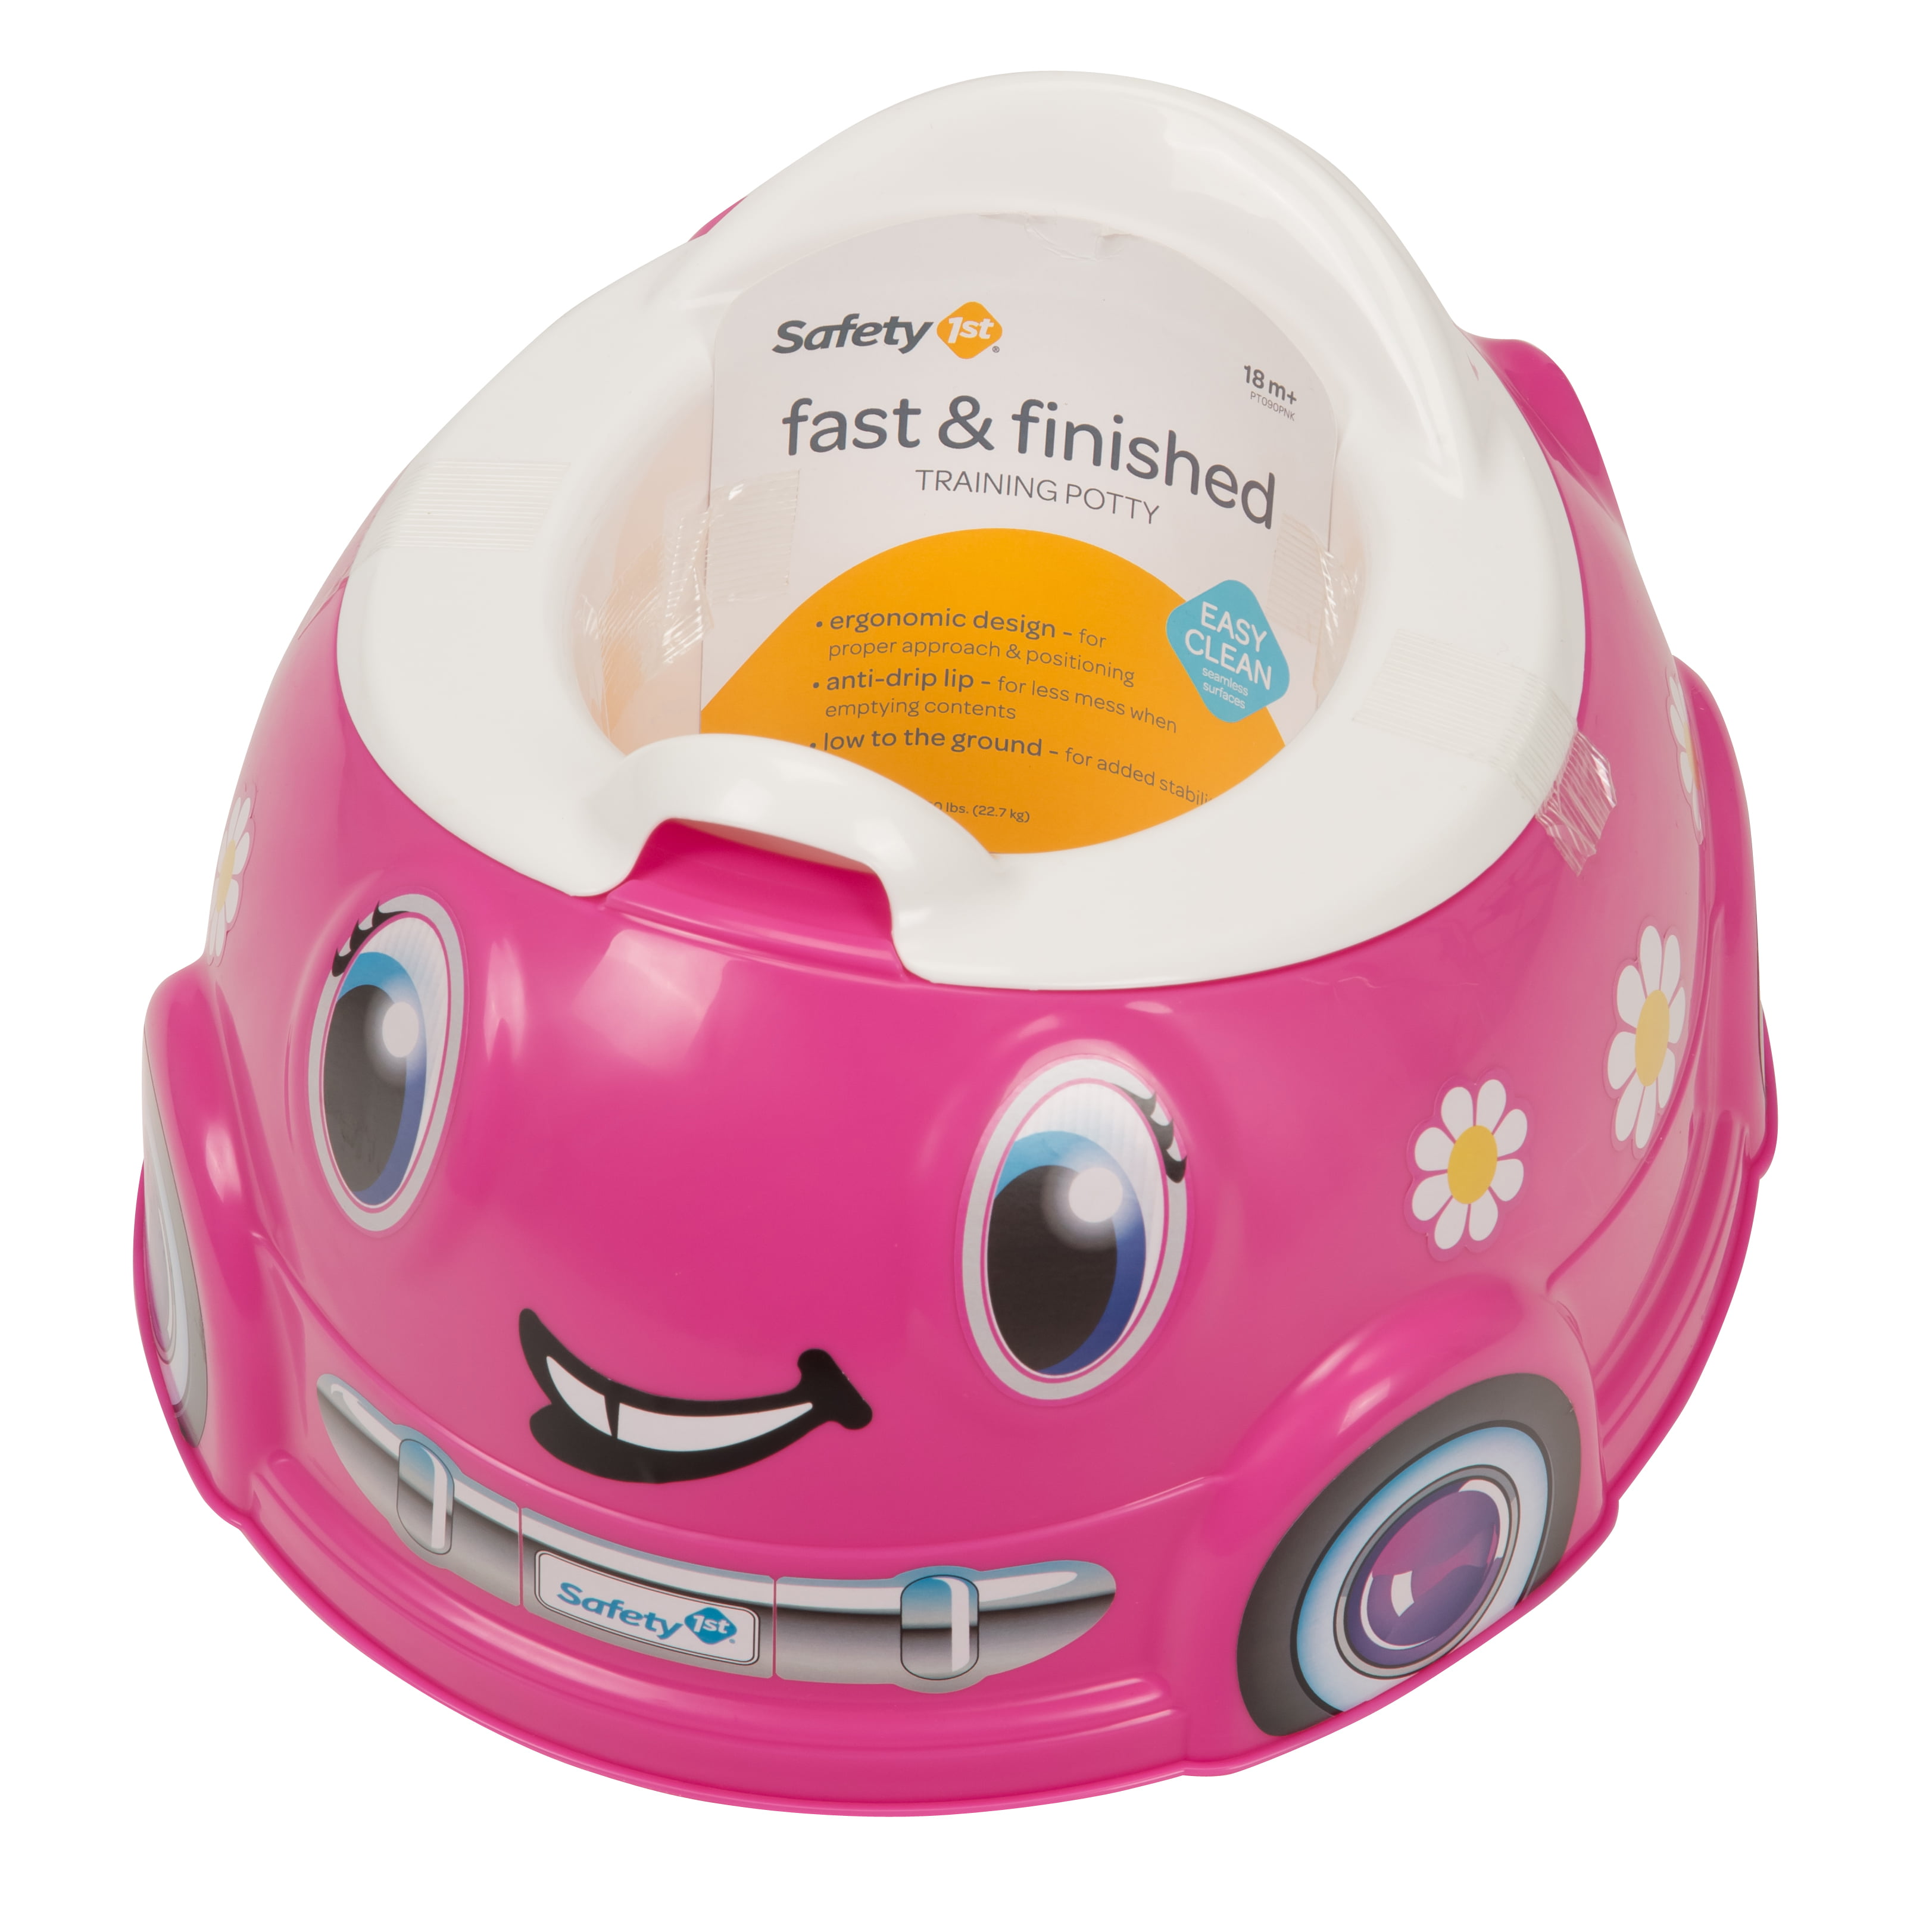 Safety 1st Fast and Finished Car Potty,Pink 